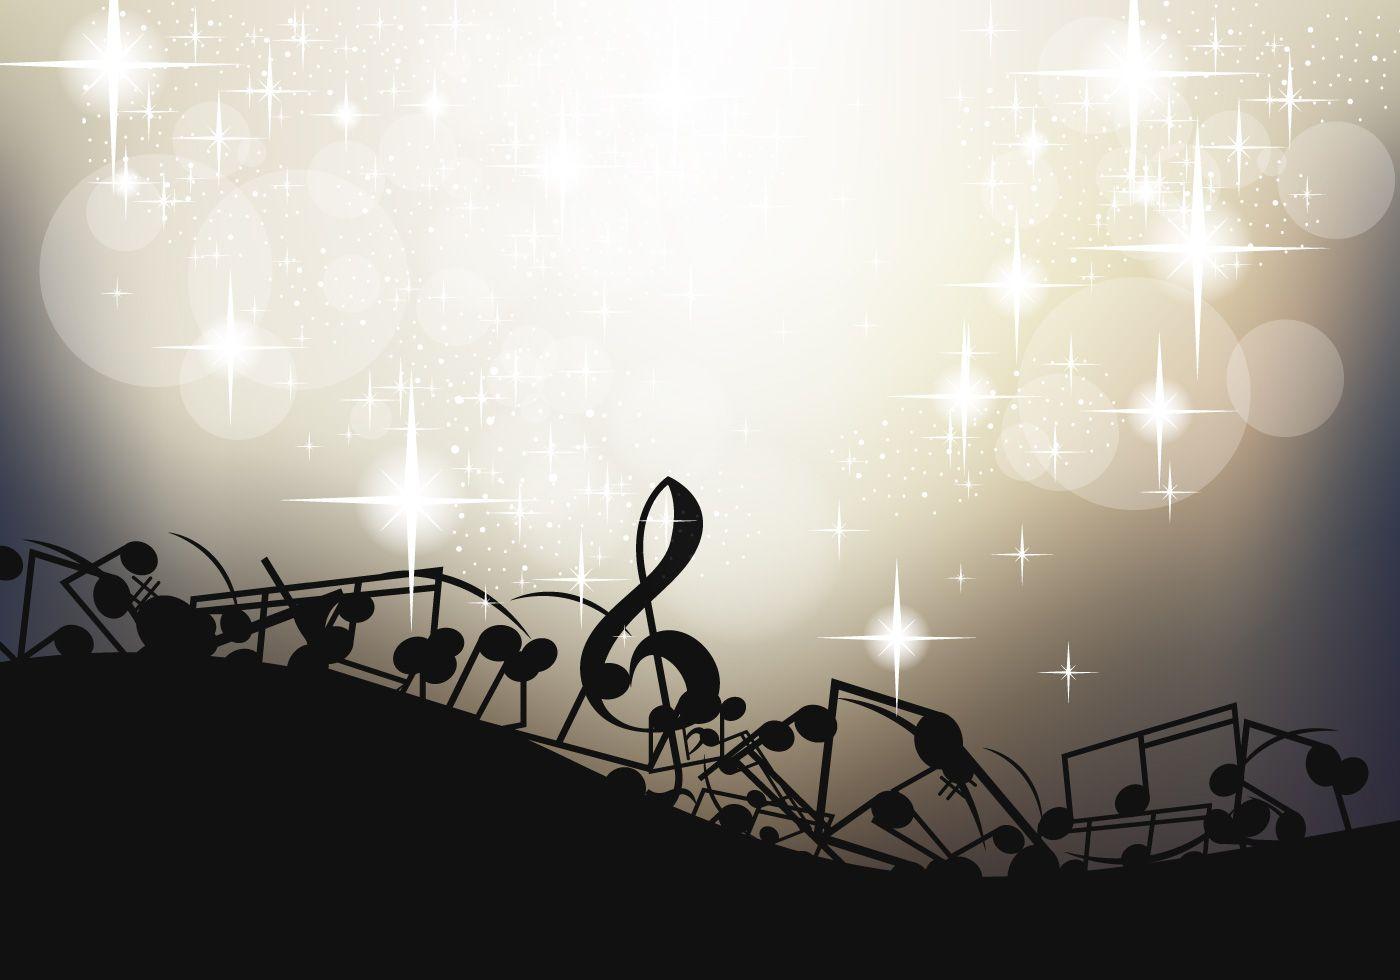 Music Backgrounds Wallpaper Cave